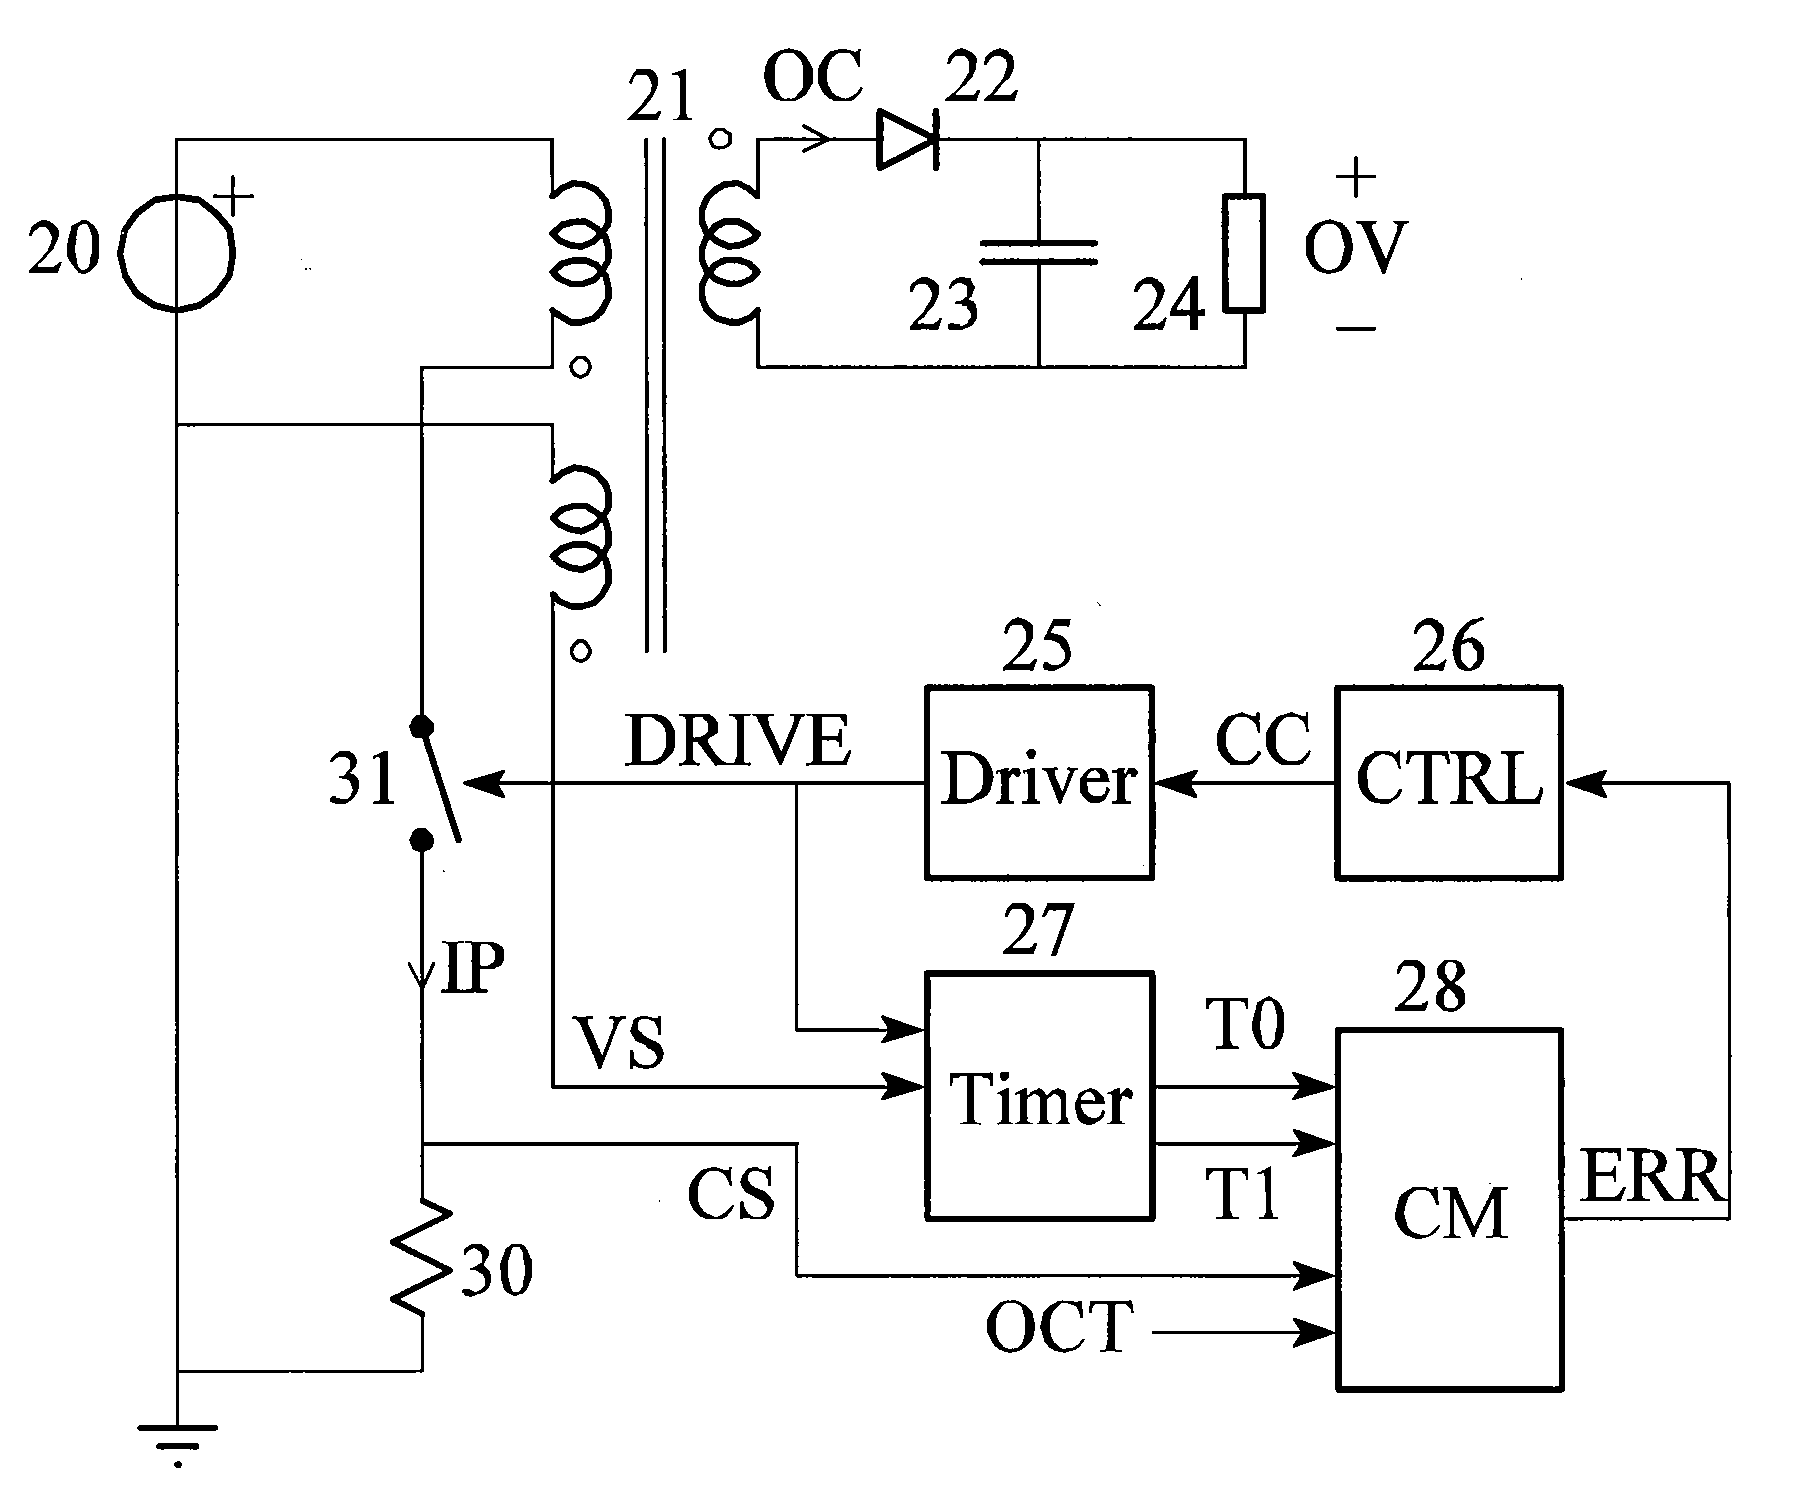 Switched mode power supply systems